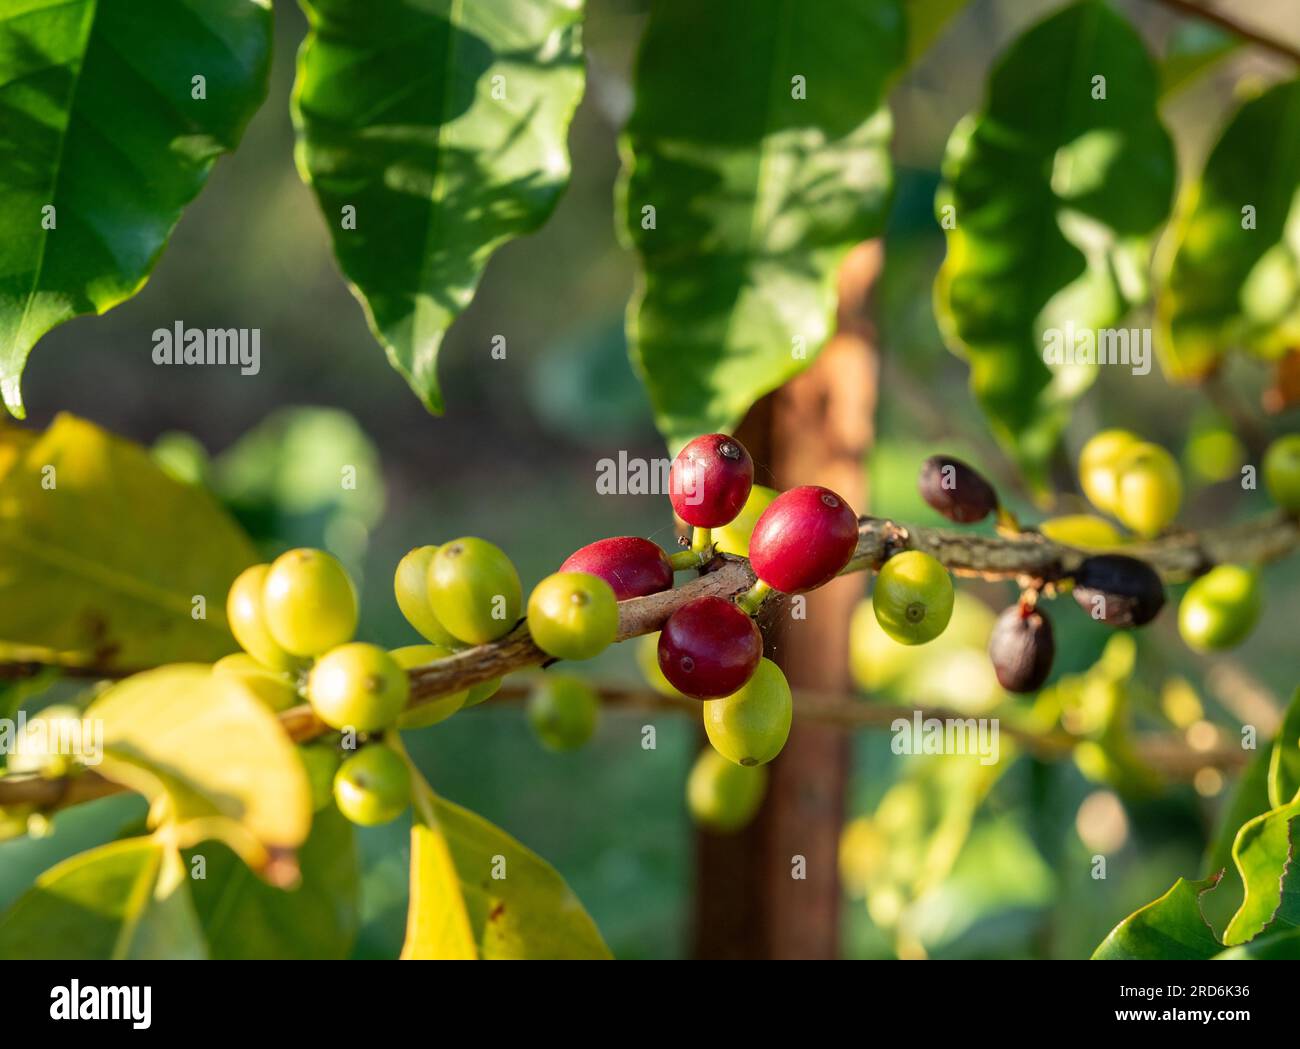 Coffee Beans in different stages of ripeness growing in clusters on a ...